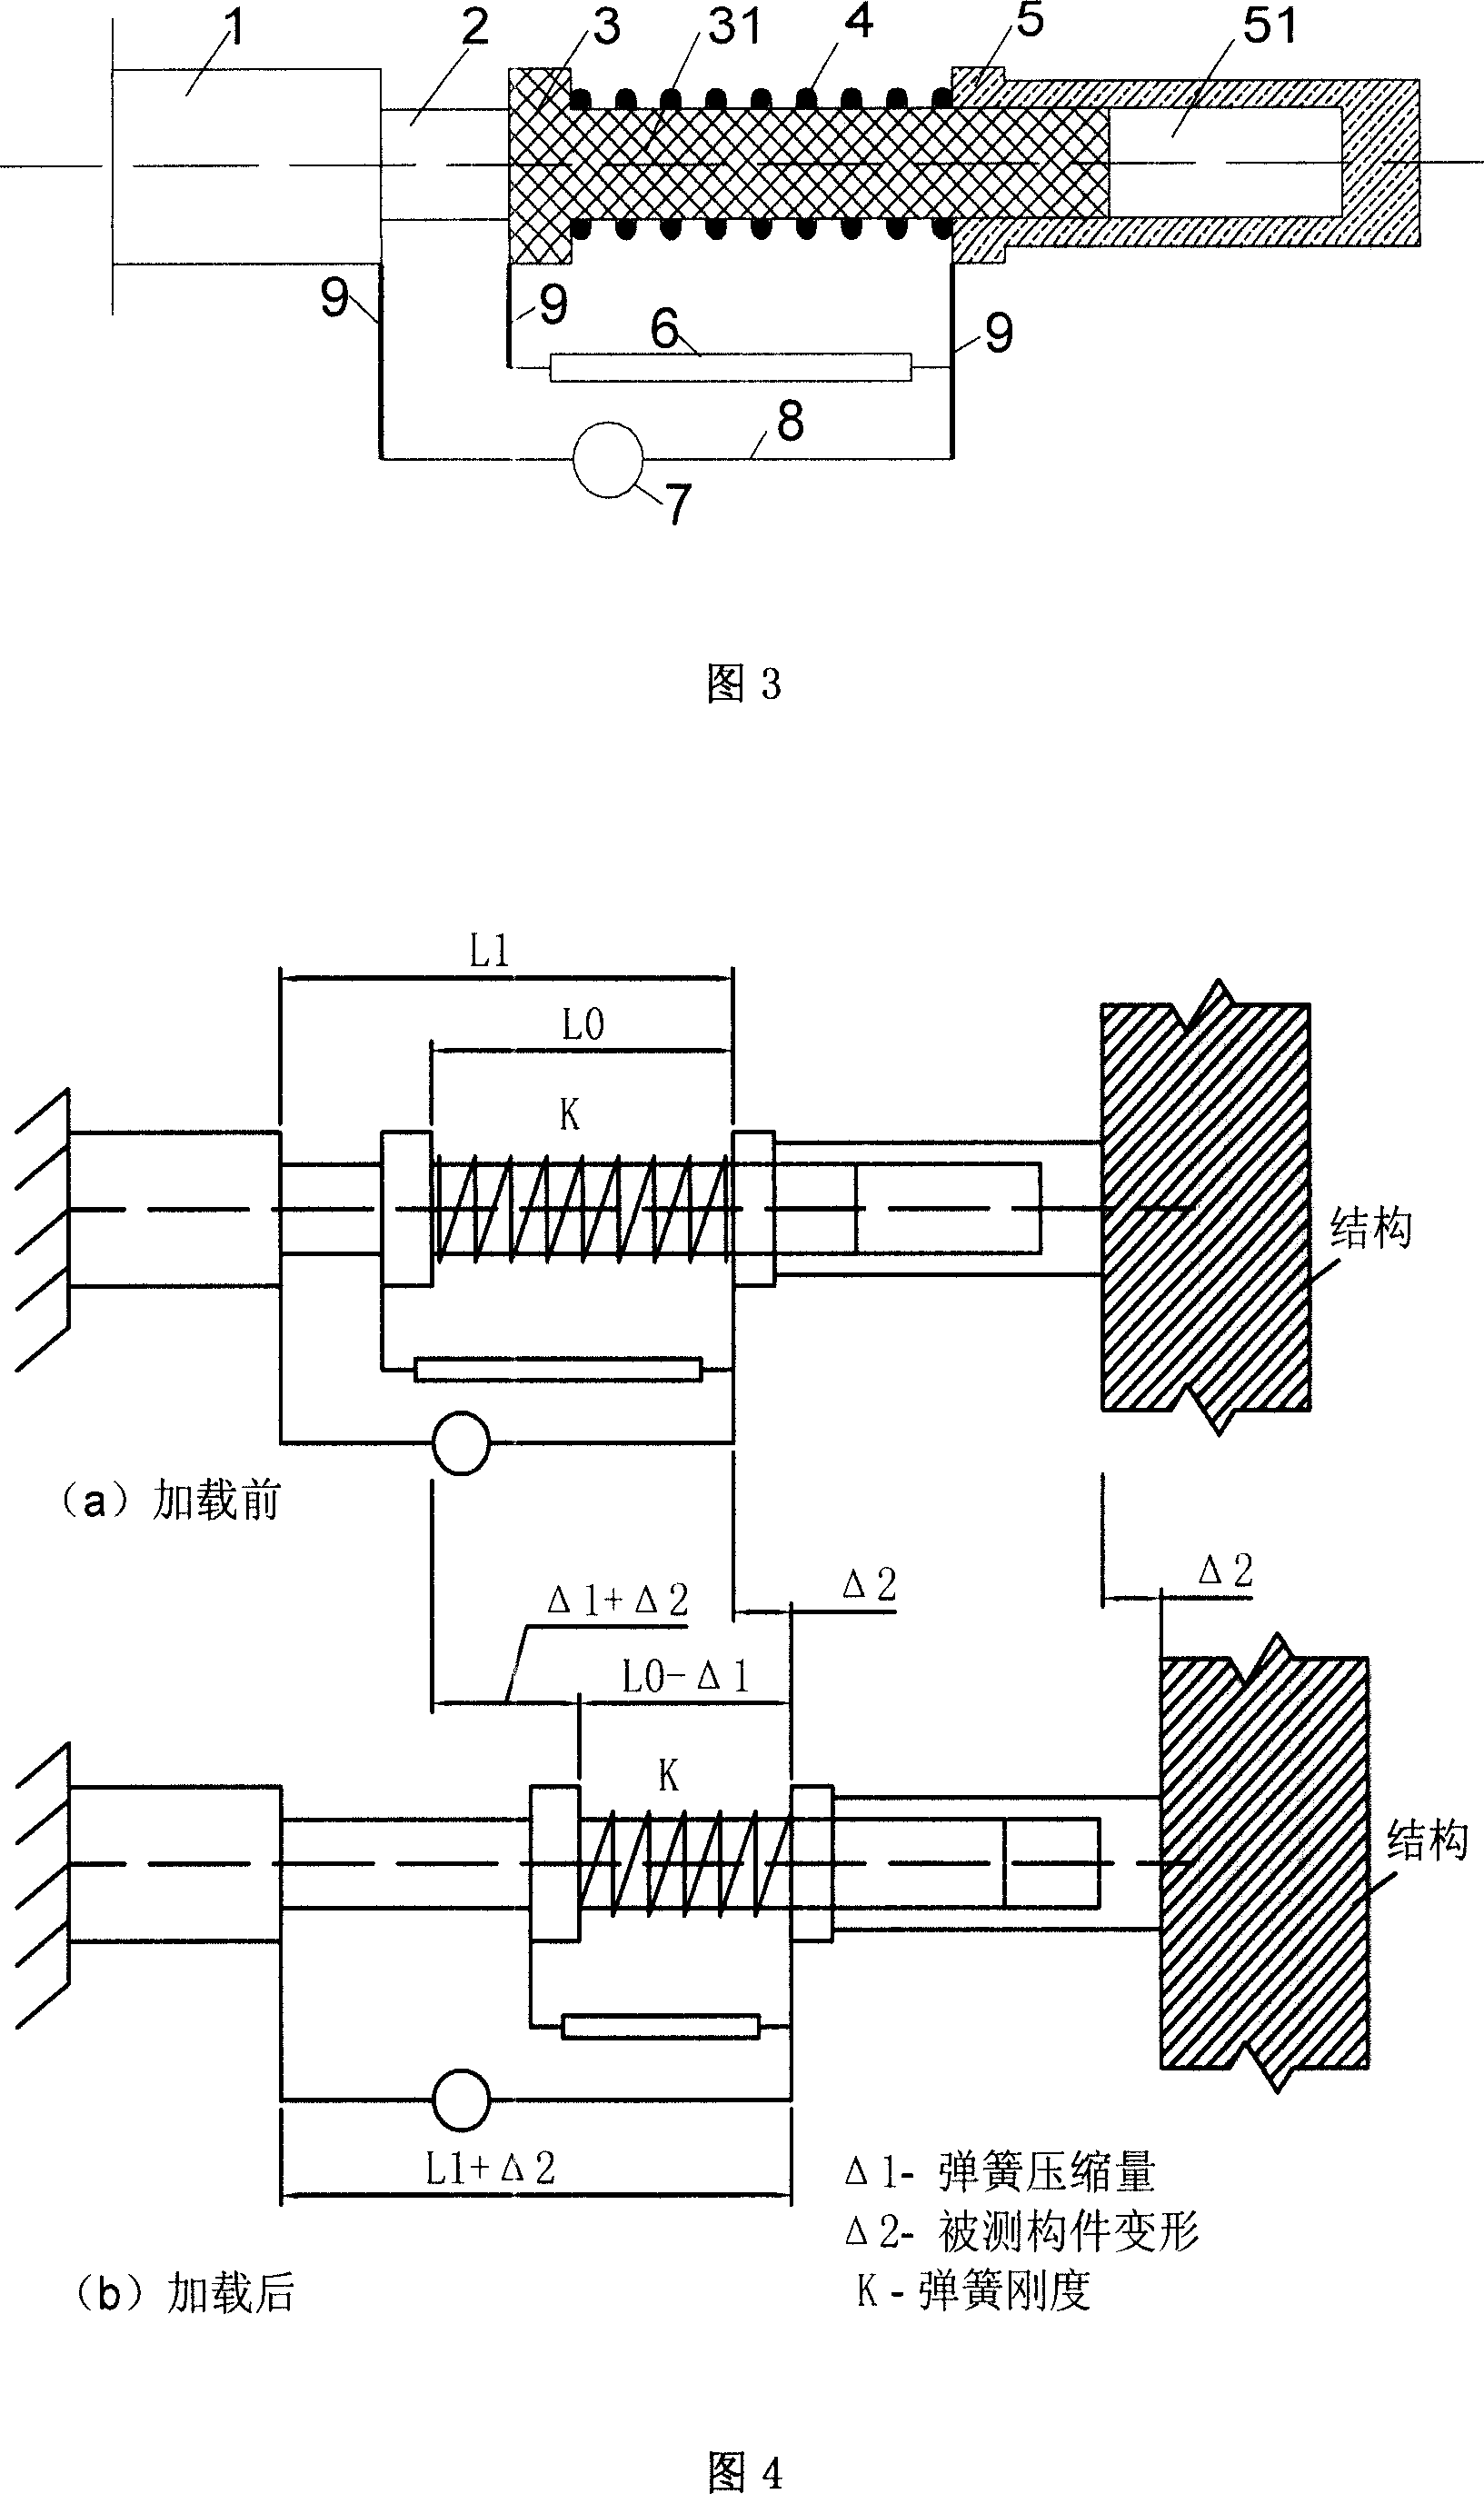 Elastica loading unit capable of simulating formation resistance capability